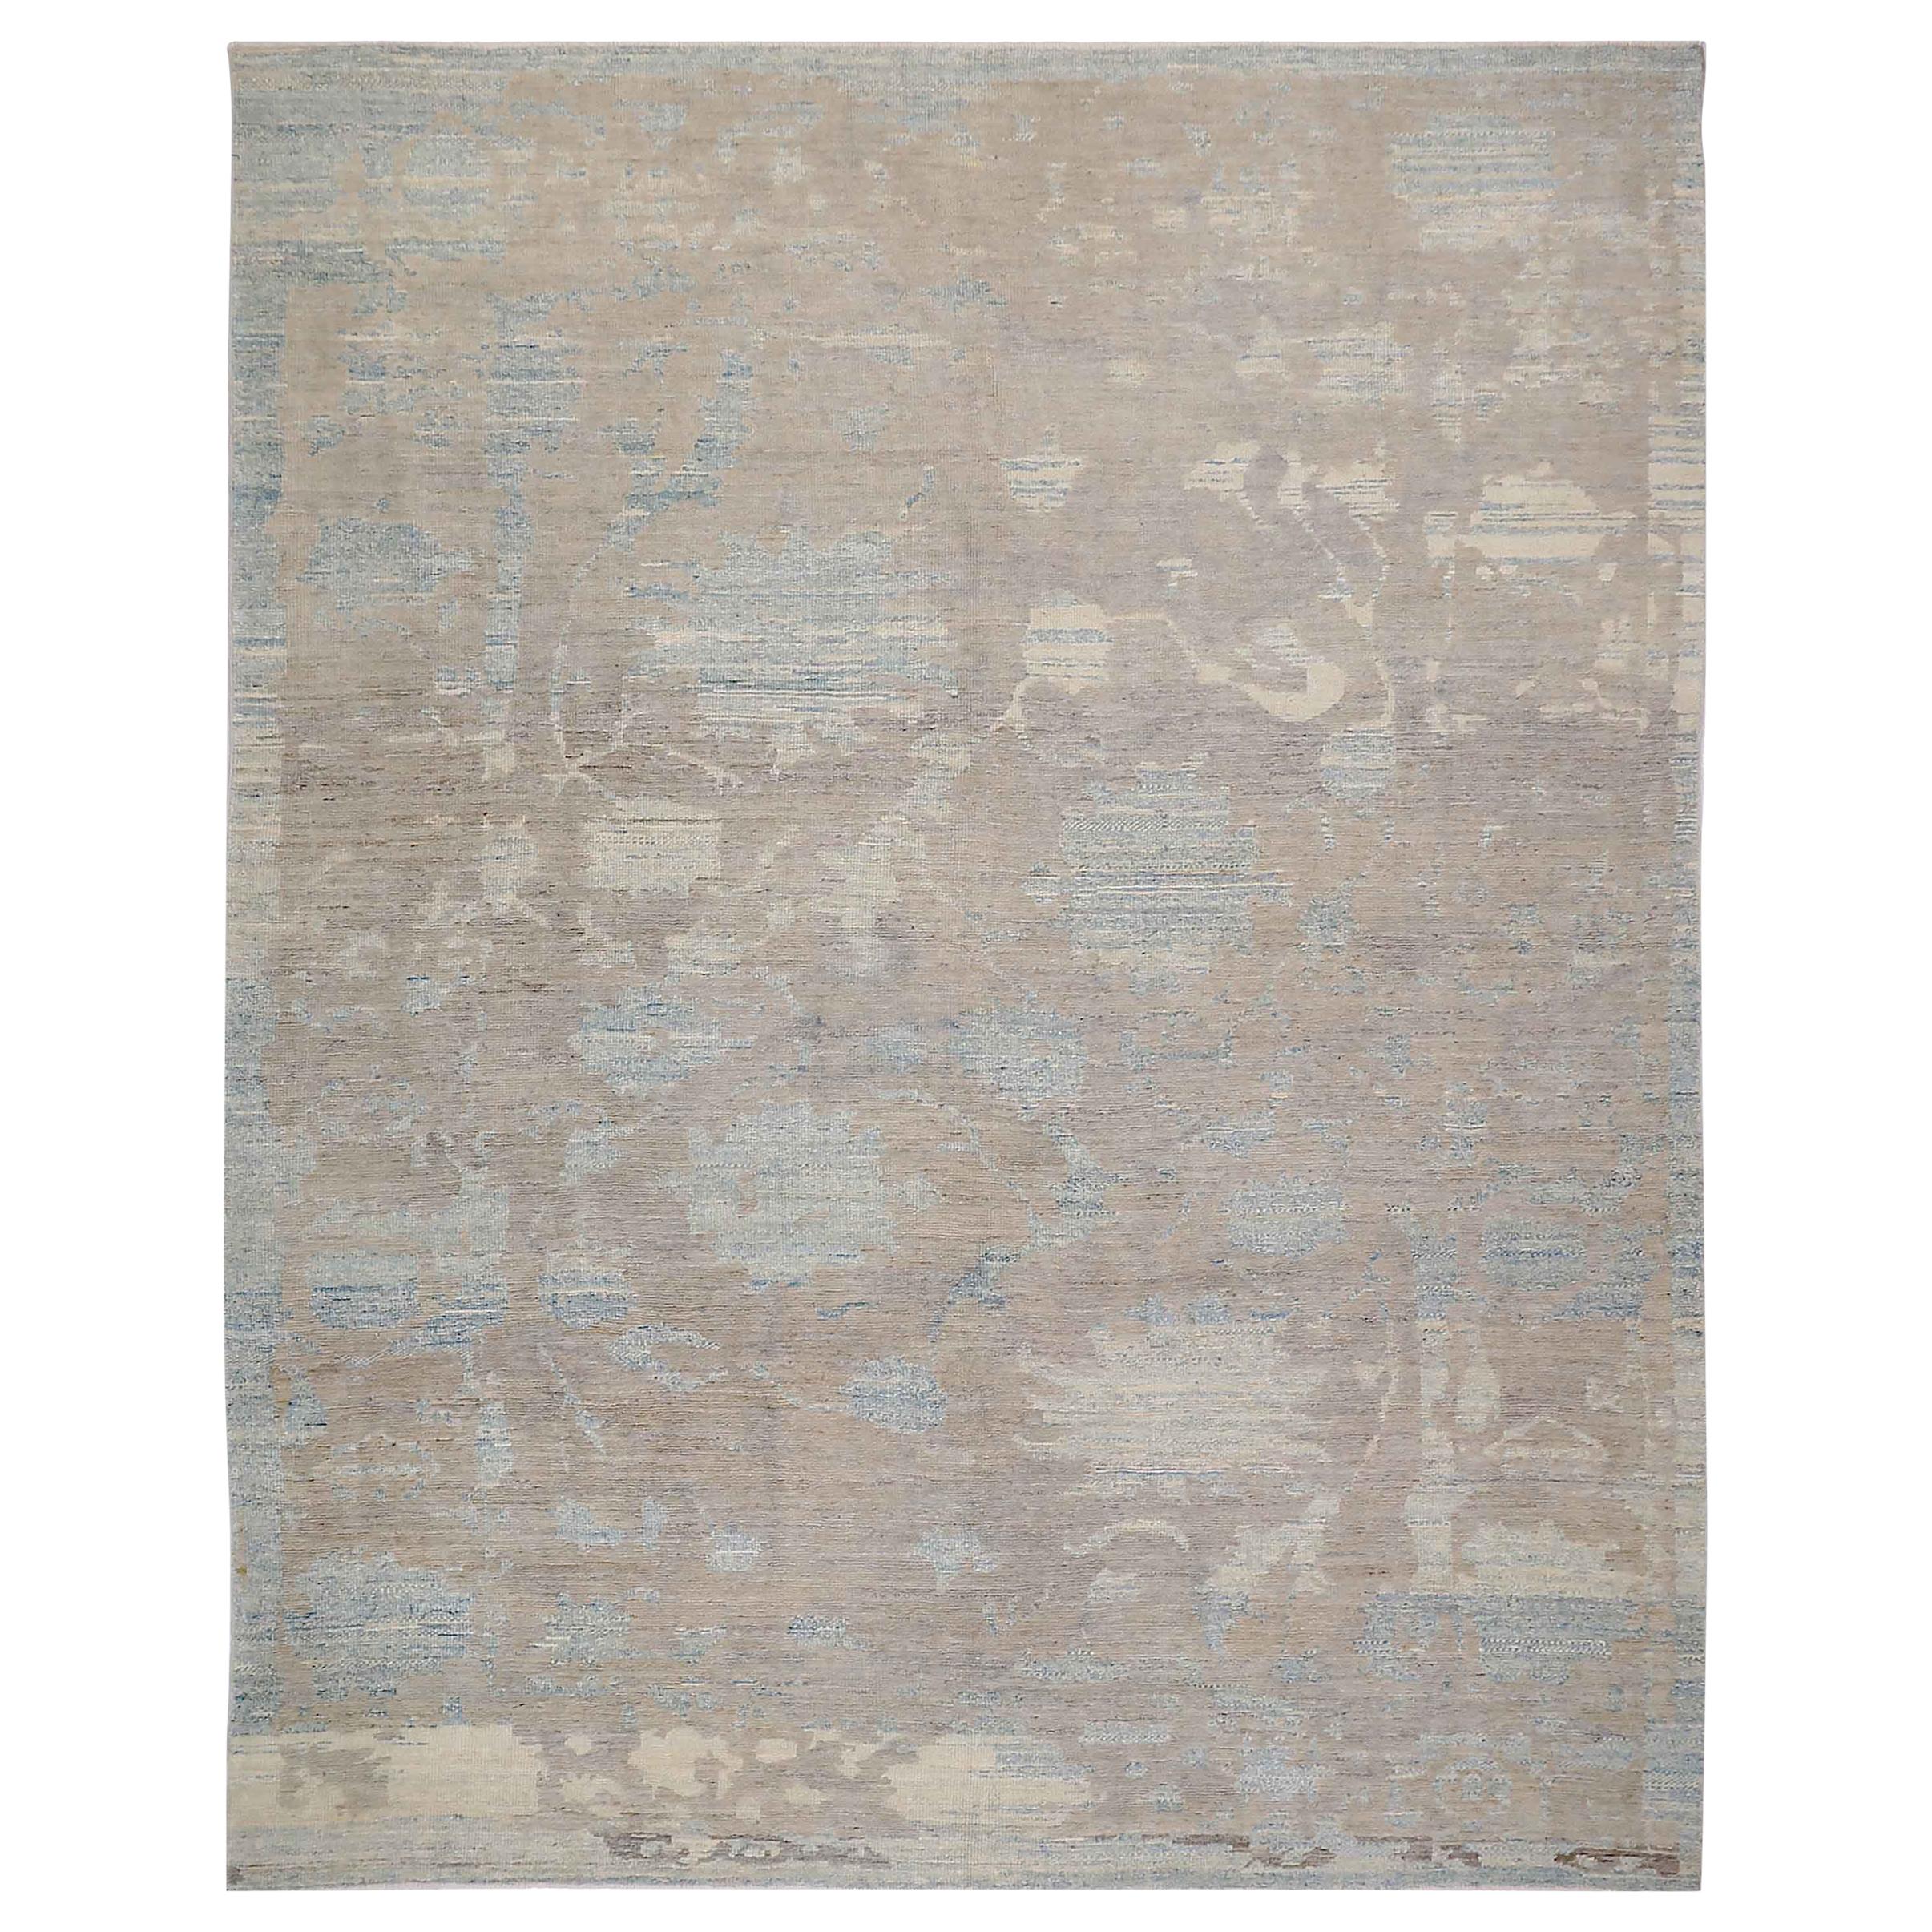 New Turkish Oushak Rug with Brown and Beige Floral Details on Blue Field For Sale